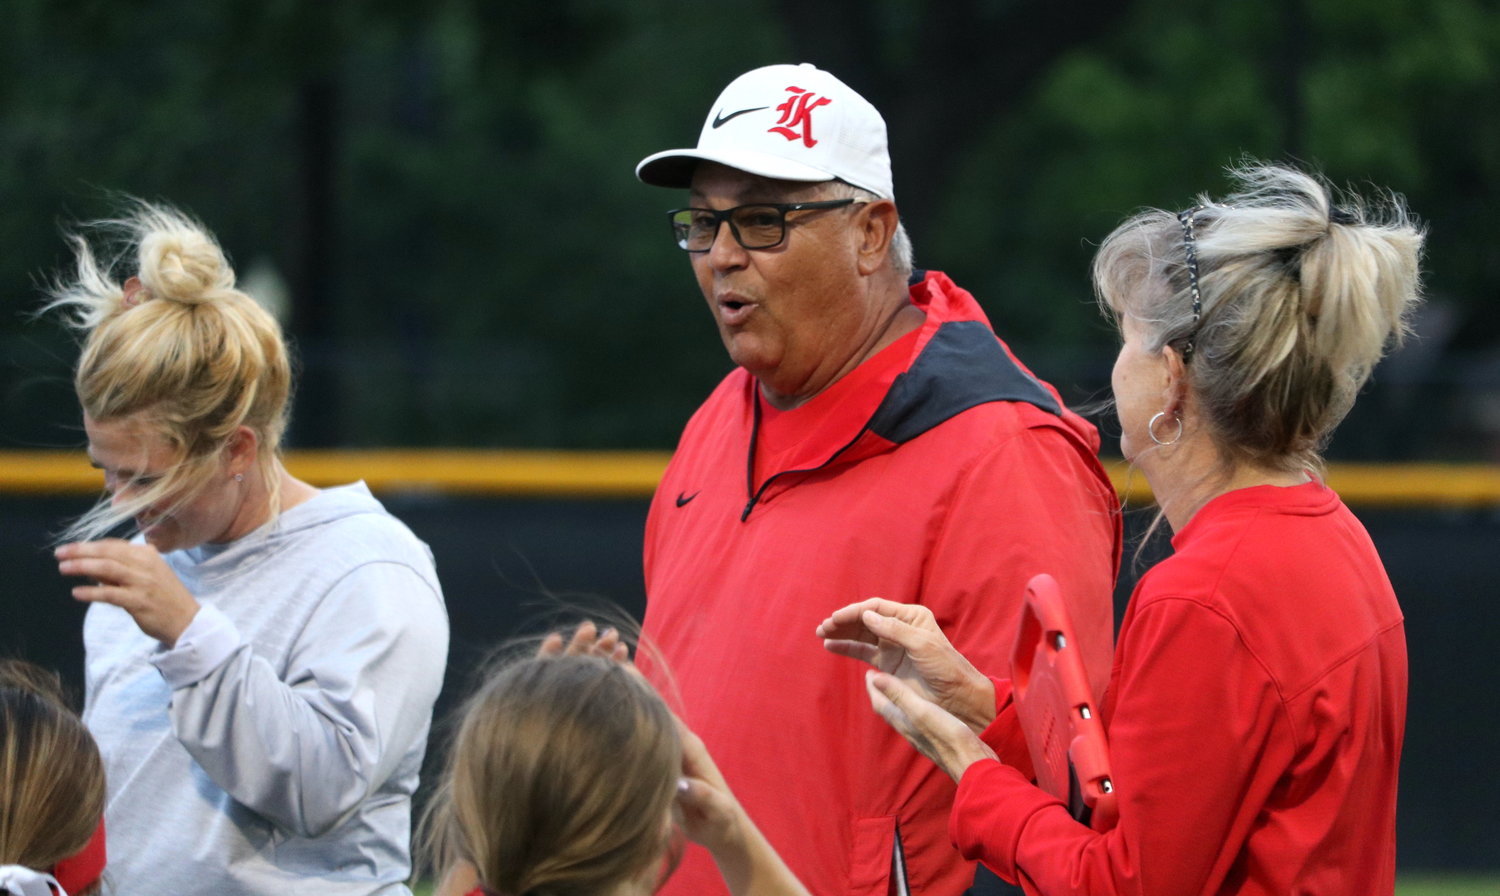 Katy head coach Kalum Haack talks to his team after the Tigers win over Taylor on Tuesday at the Katy softball field.